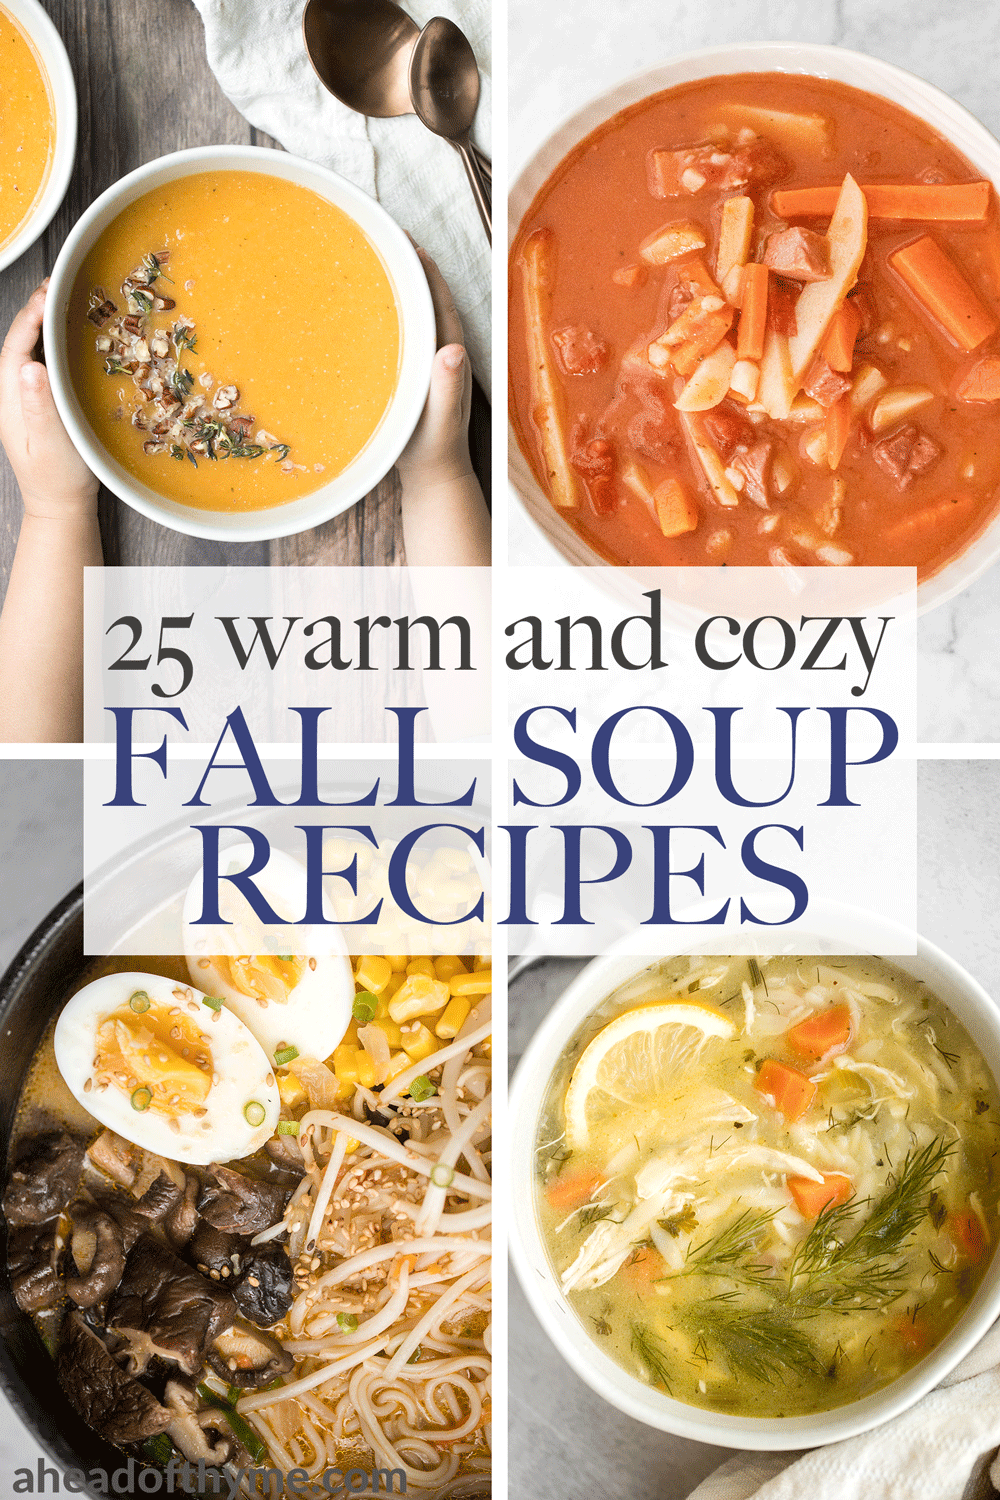 25 Warm and Cozy Fall Soup Recipes | Ahead of Thyme